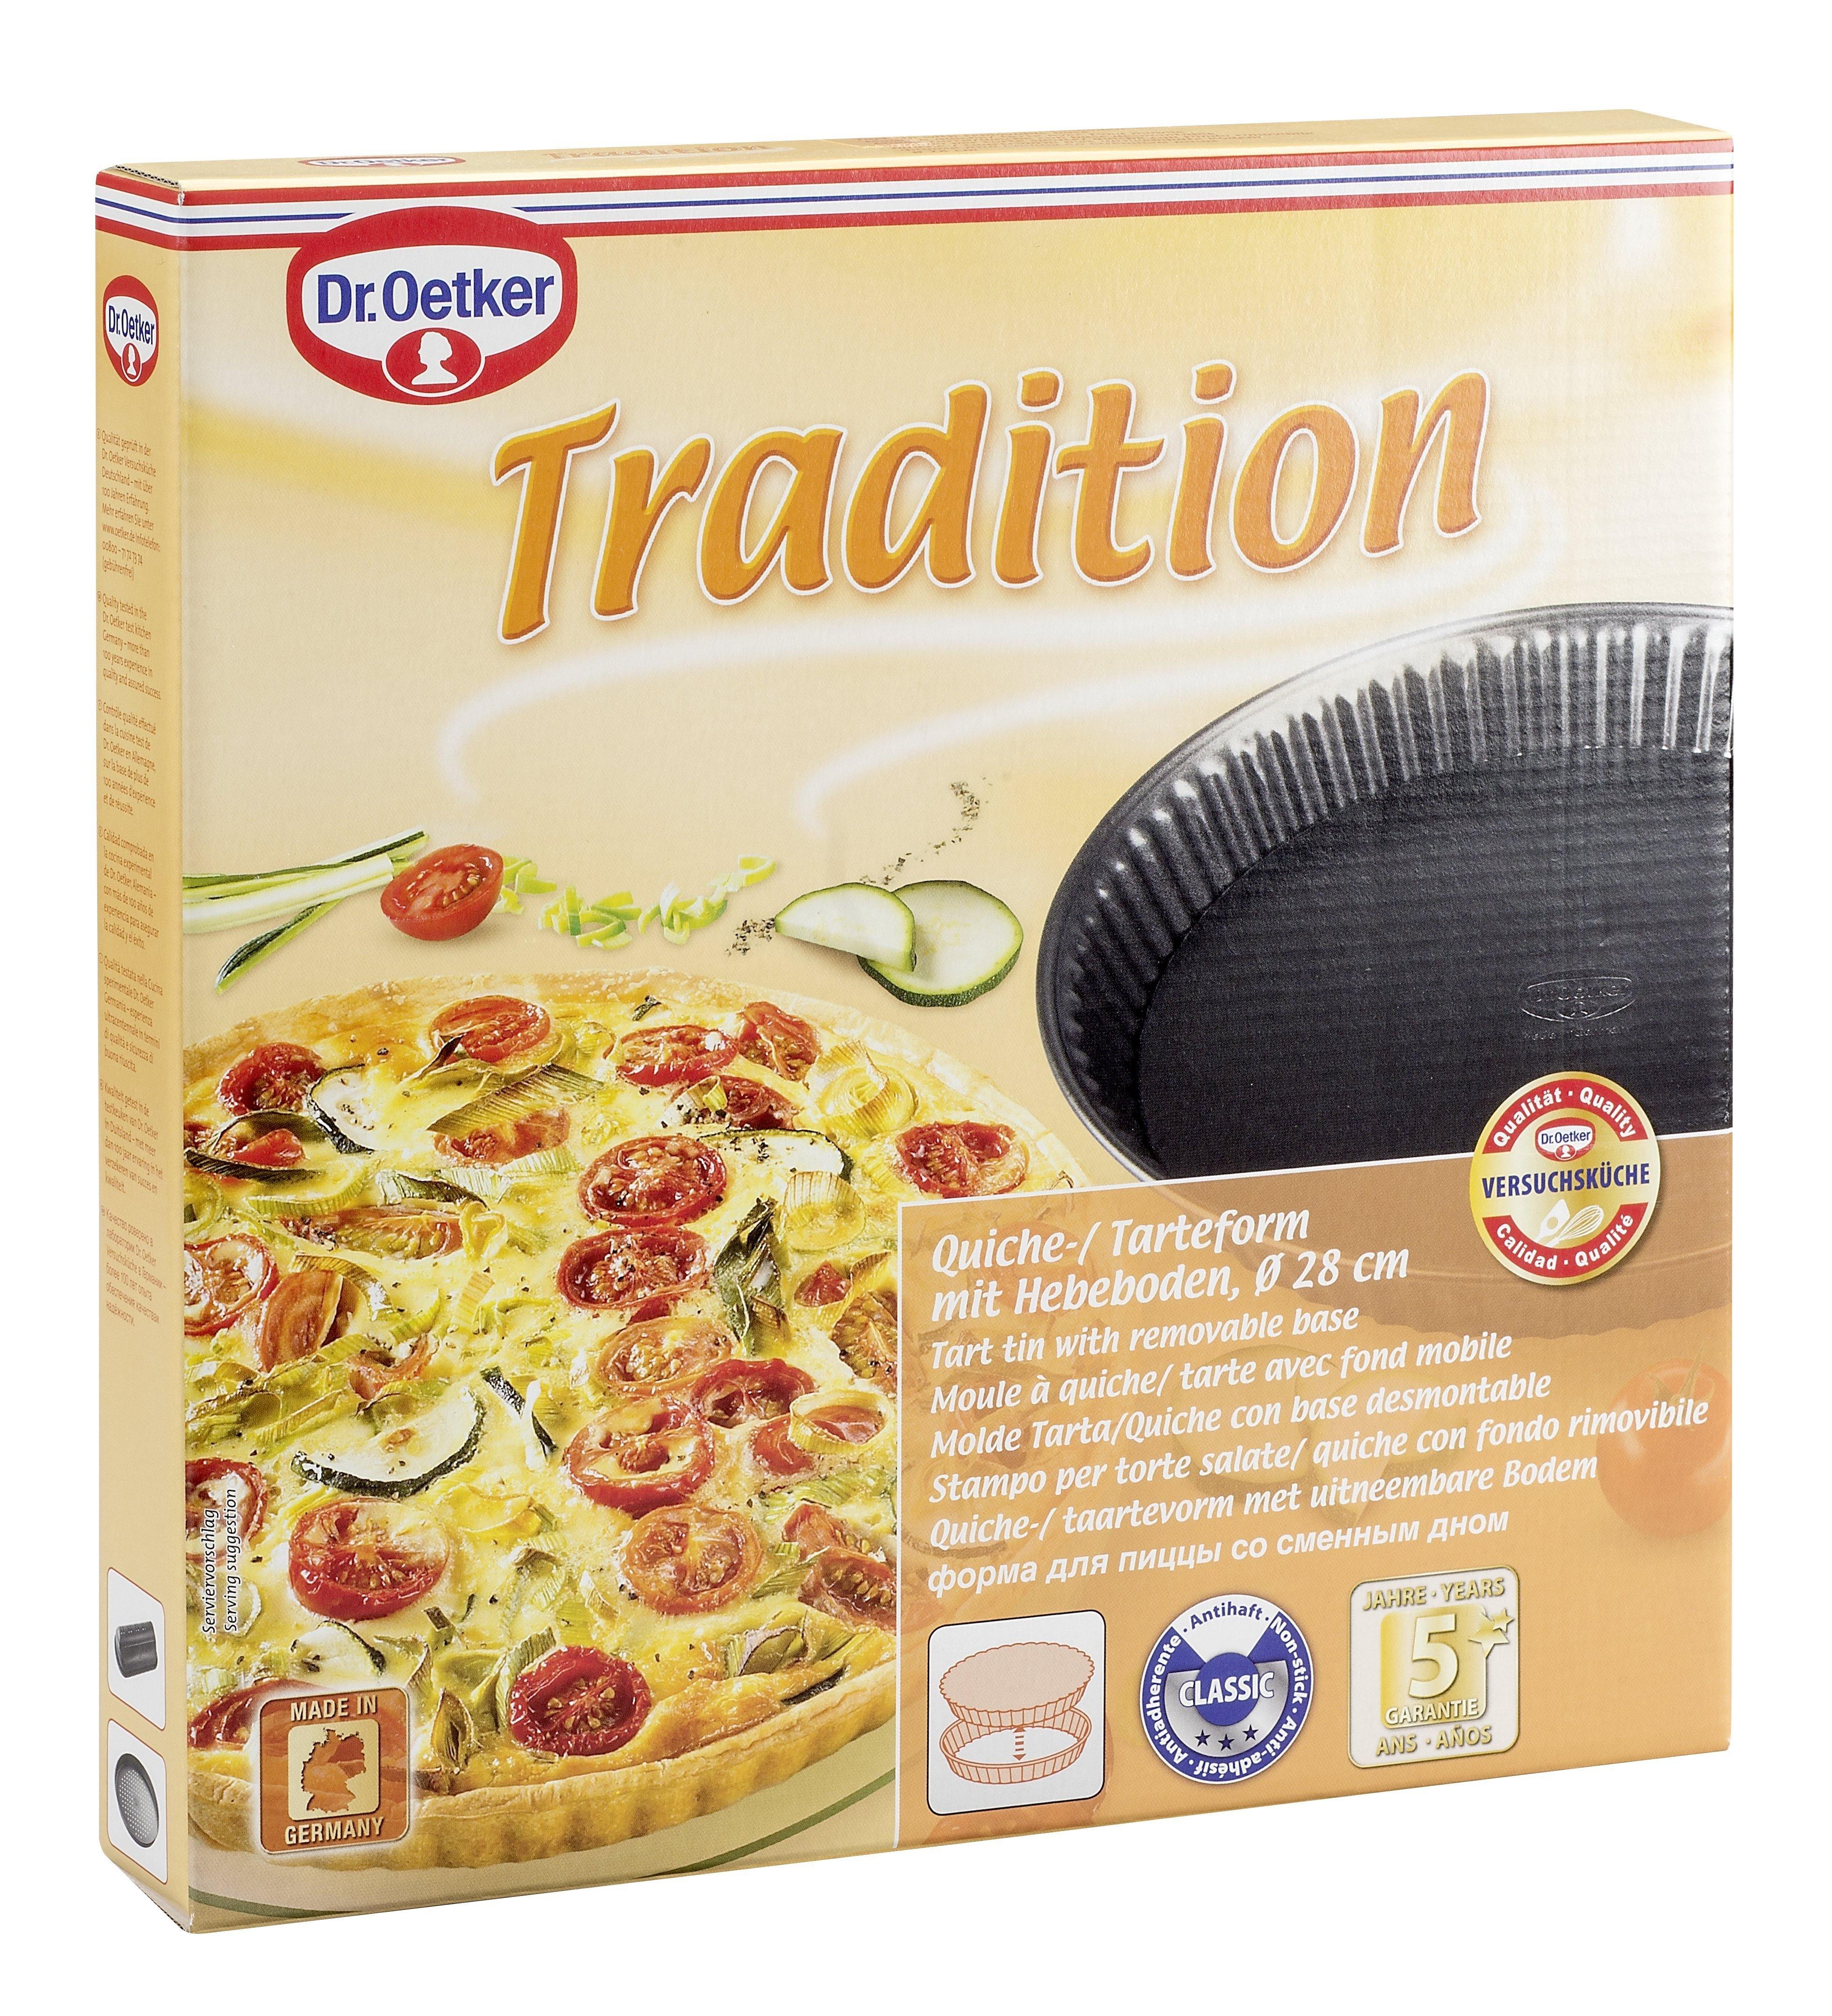 Dr. Oetker "Tradition" Tart Tin, Black, 28X4 Cm - Whole and All